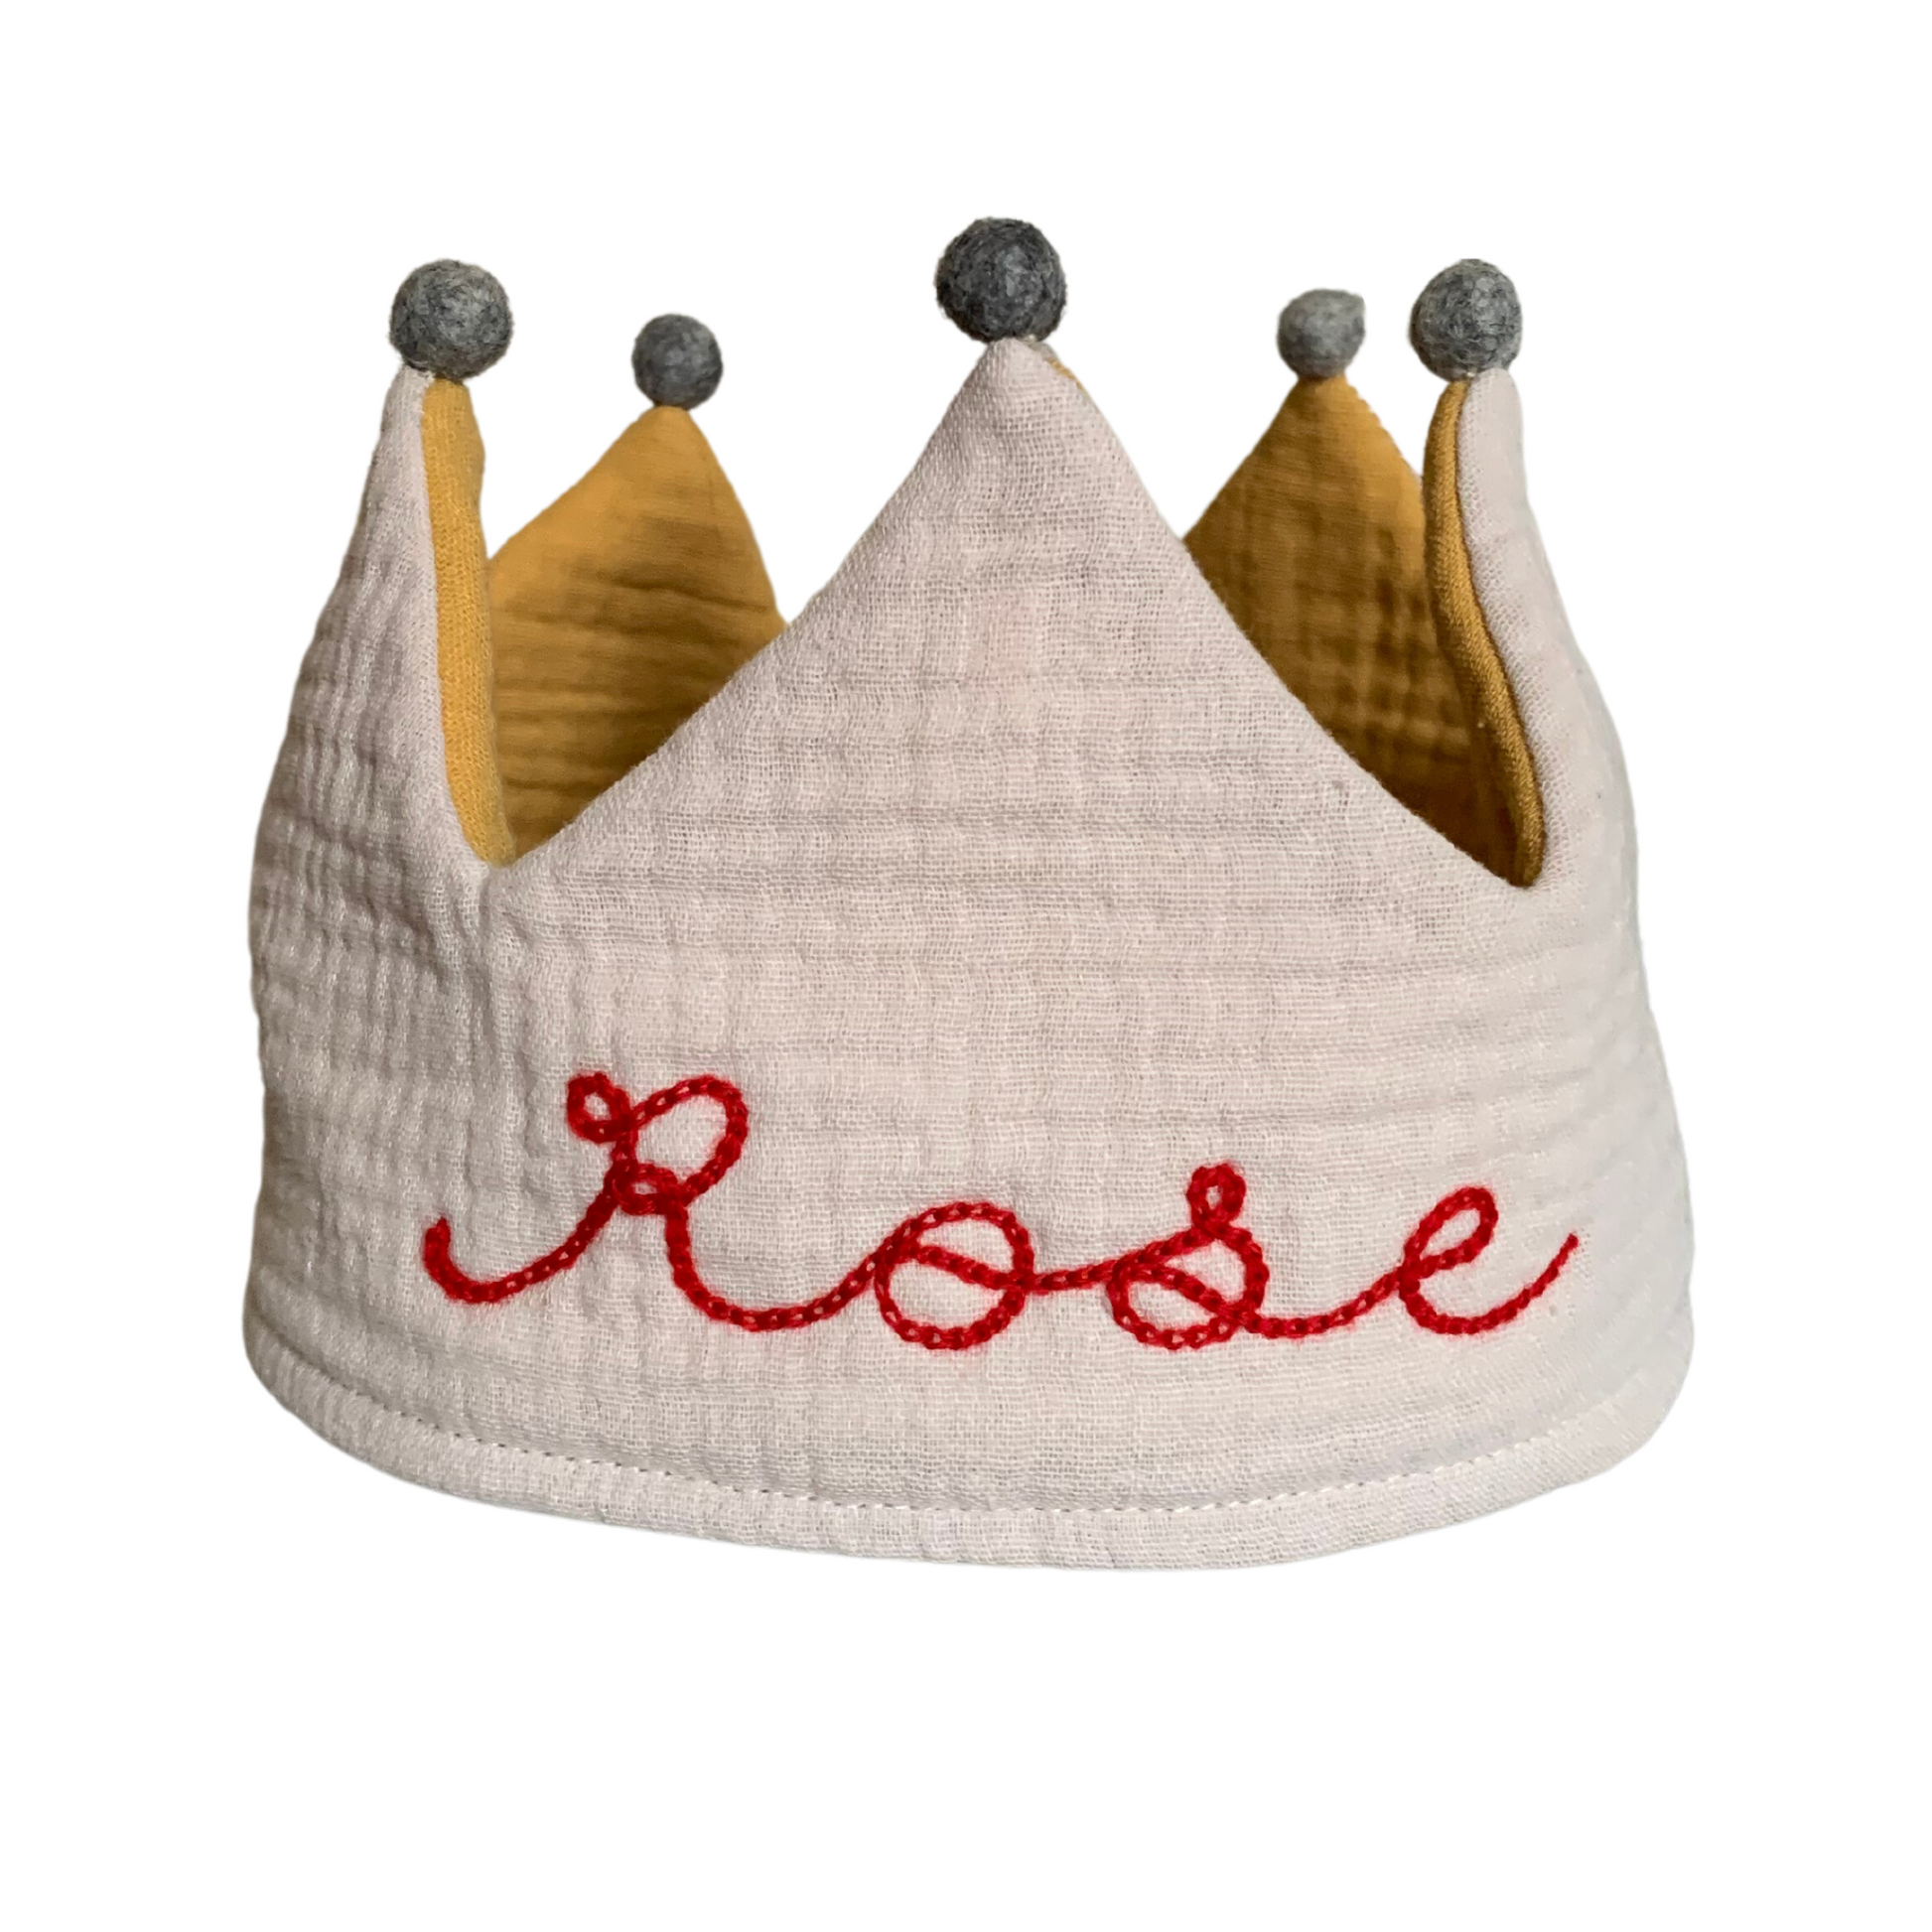 Little King Crown MINI EMBROIDERY / INSTANT Embroidery Fill Stitch